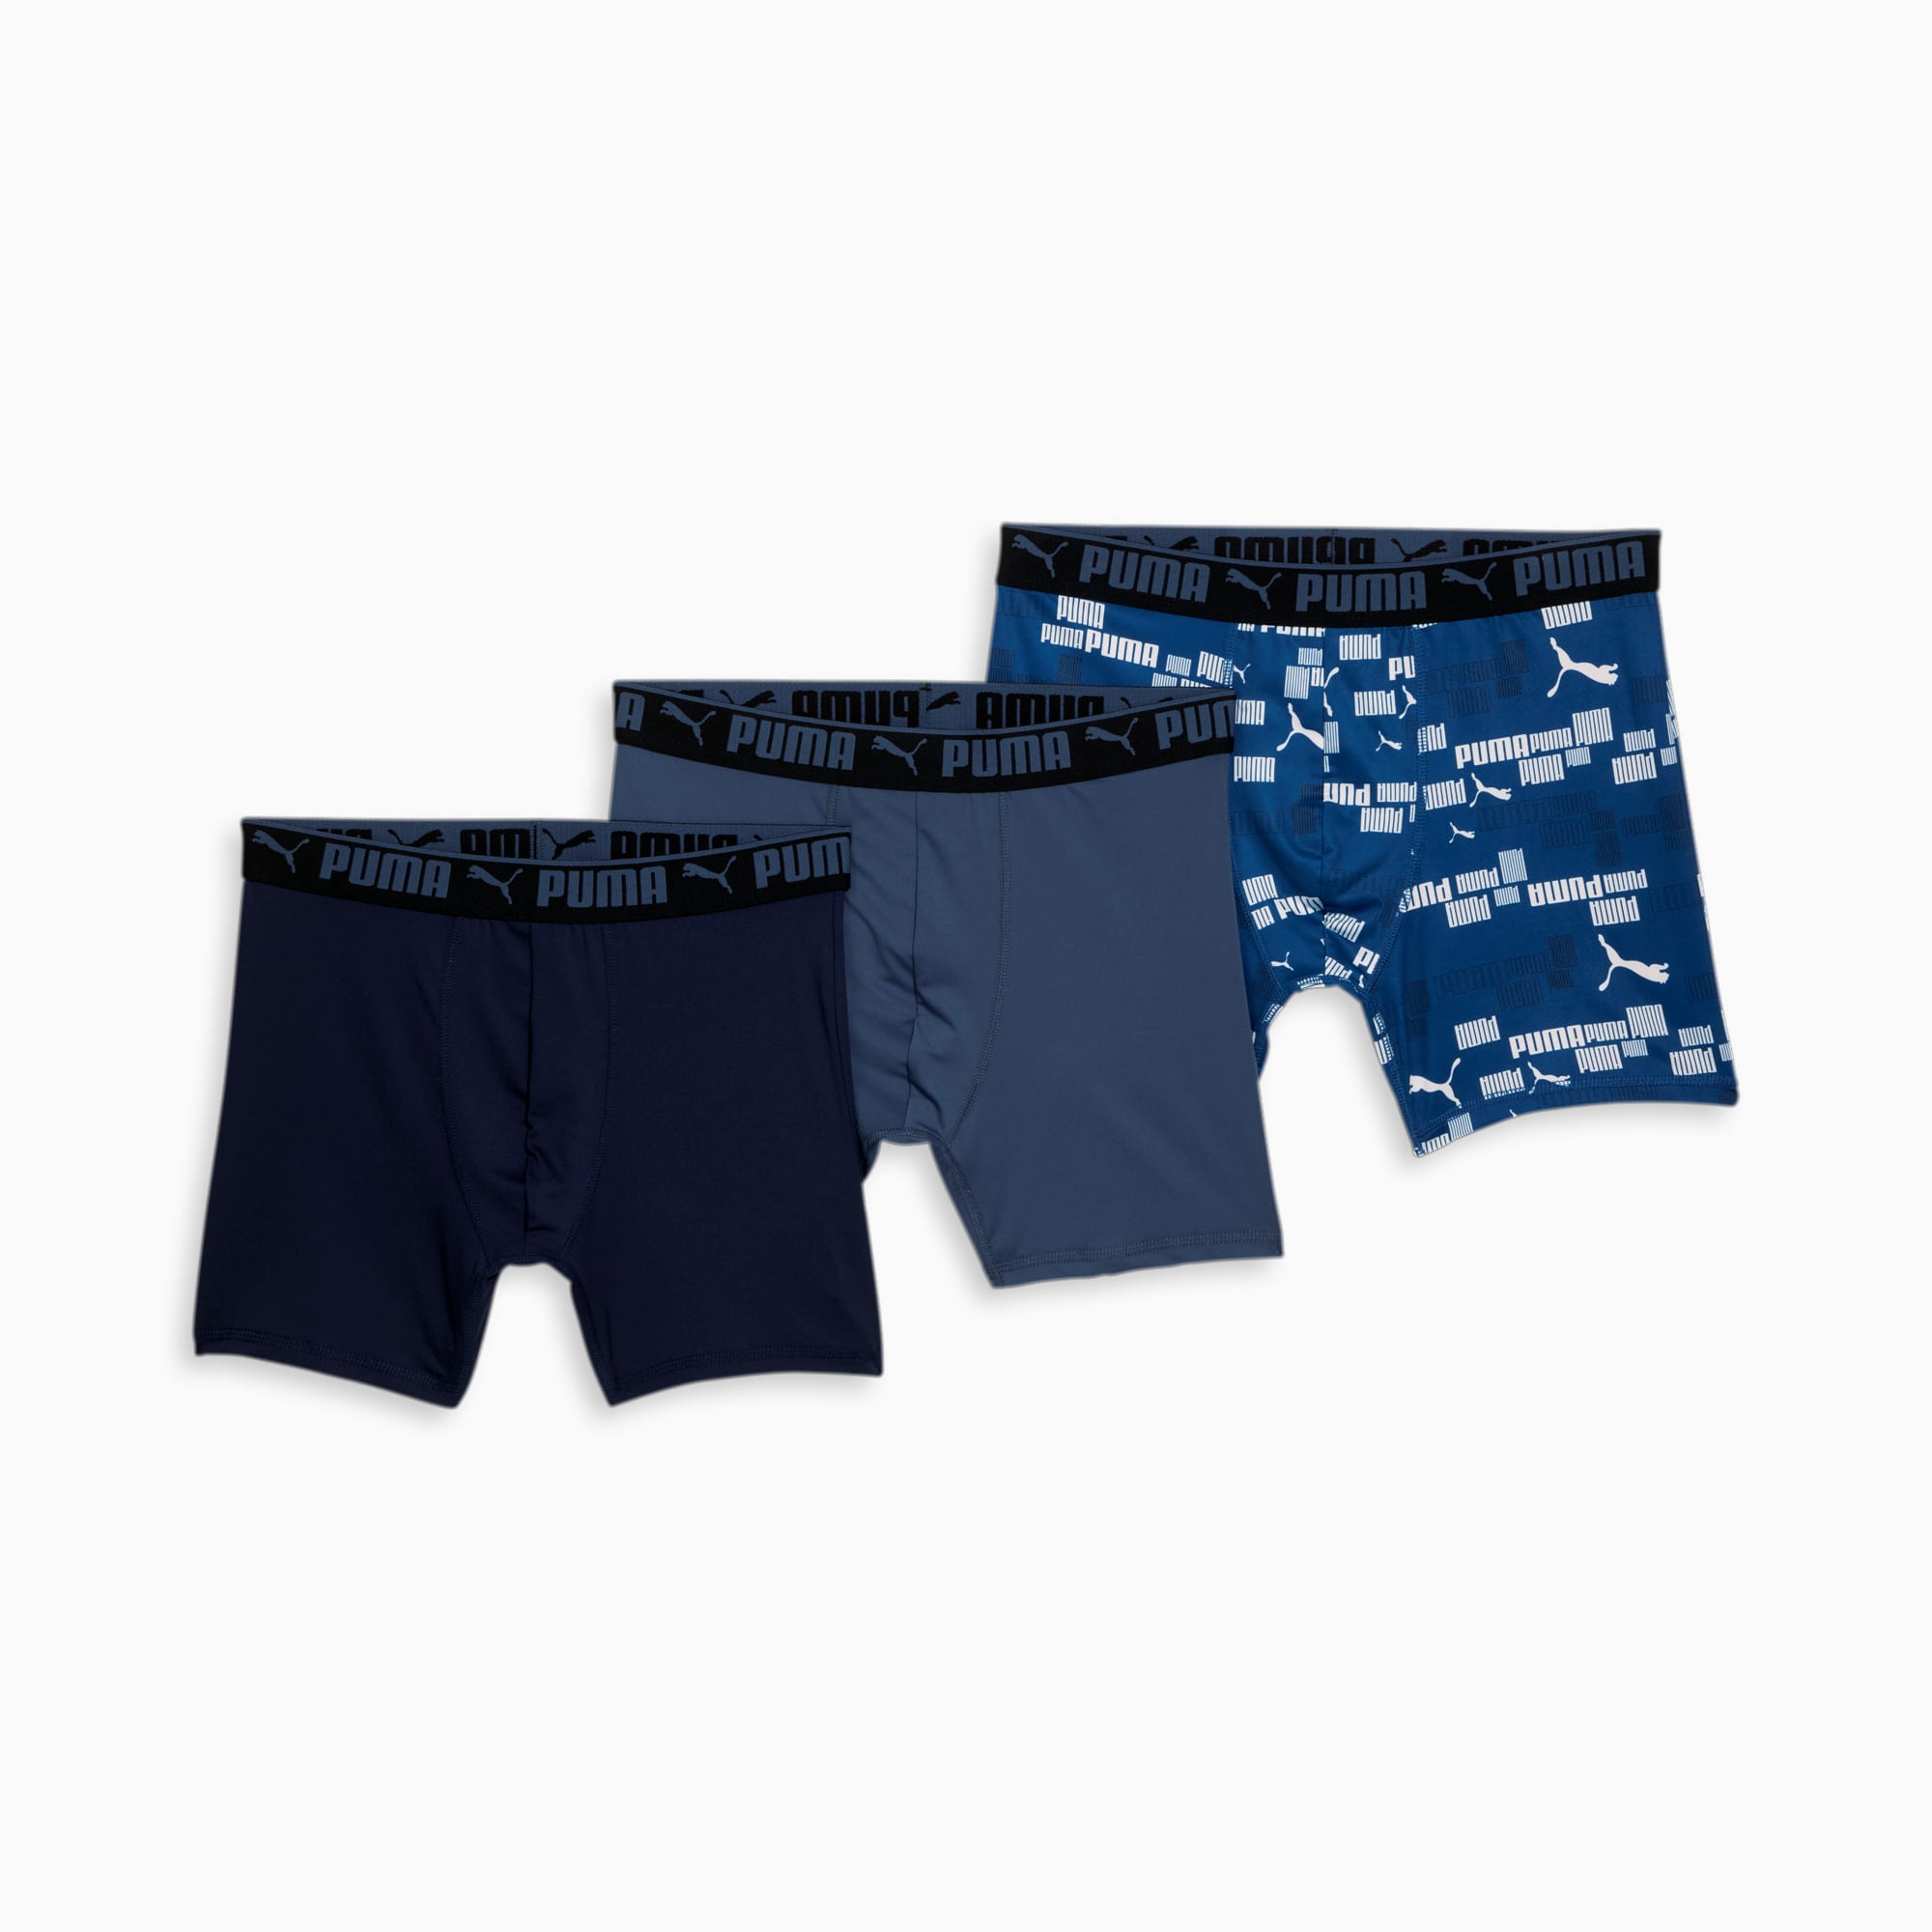 Fruit of the Loom Men's boxer brief, Black/Grey, Small(Pack of 7) at   Men's Clothing store: Men Underwear